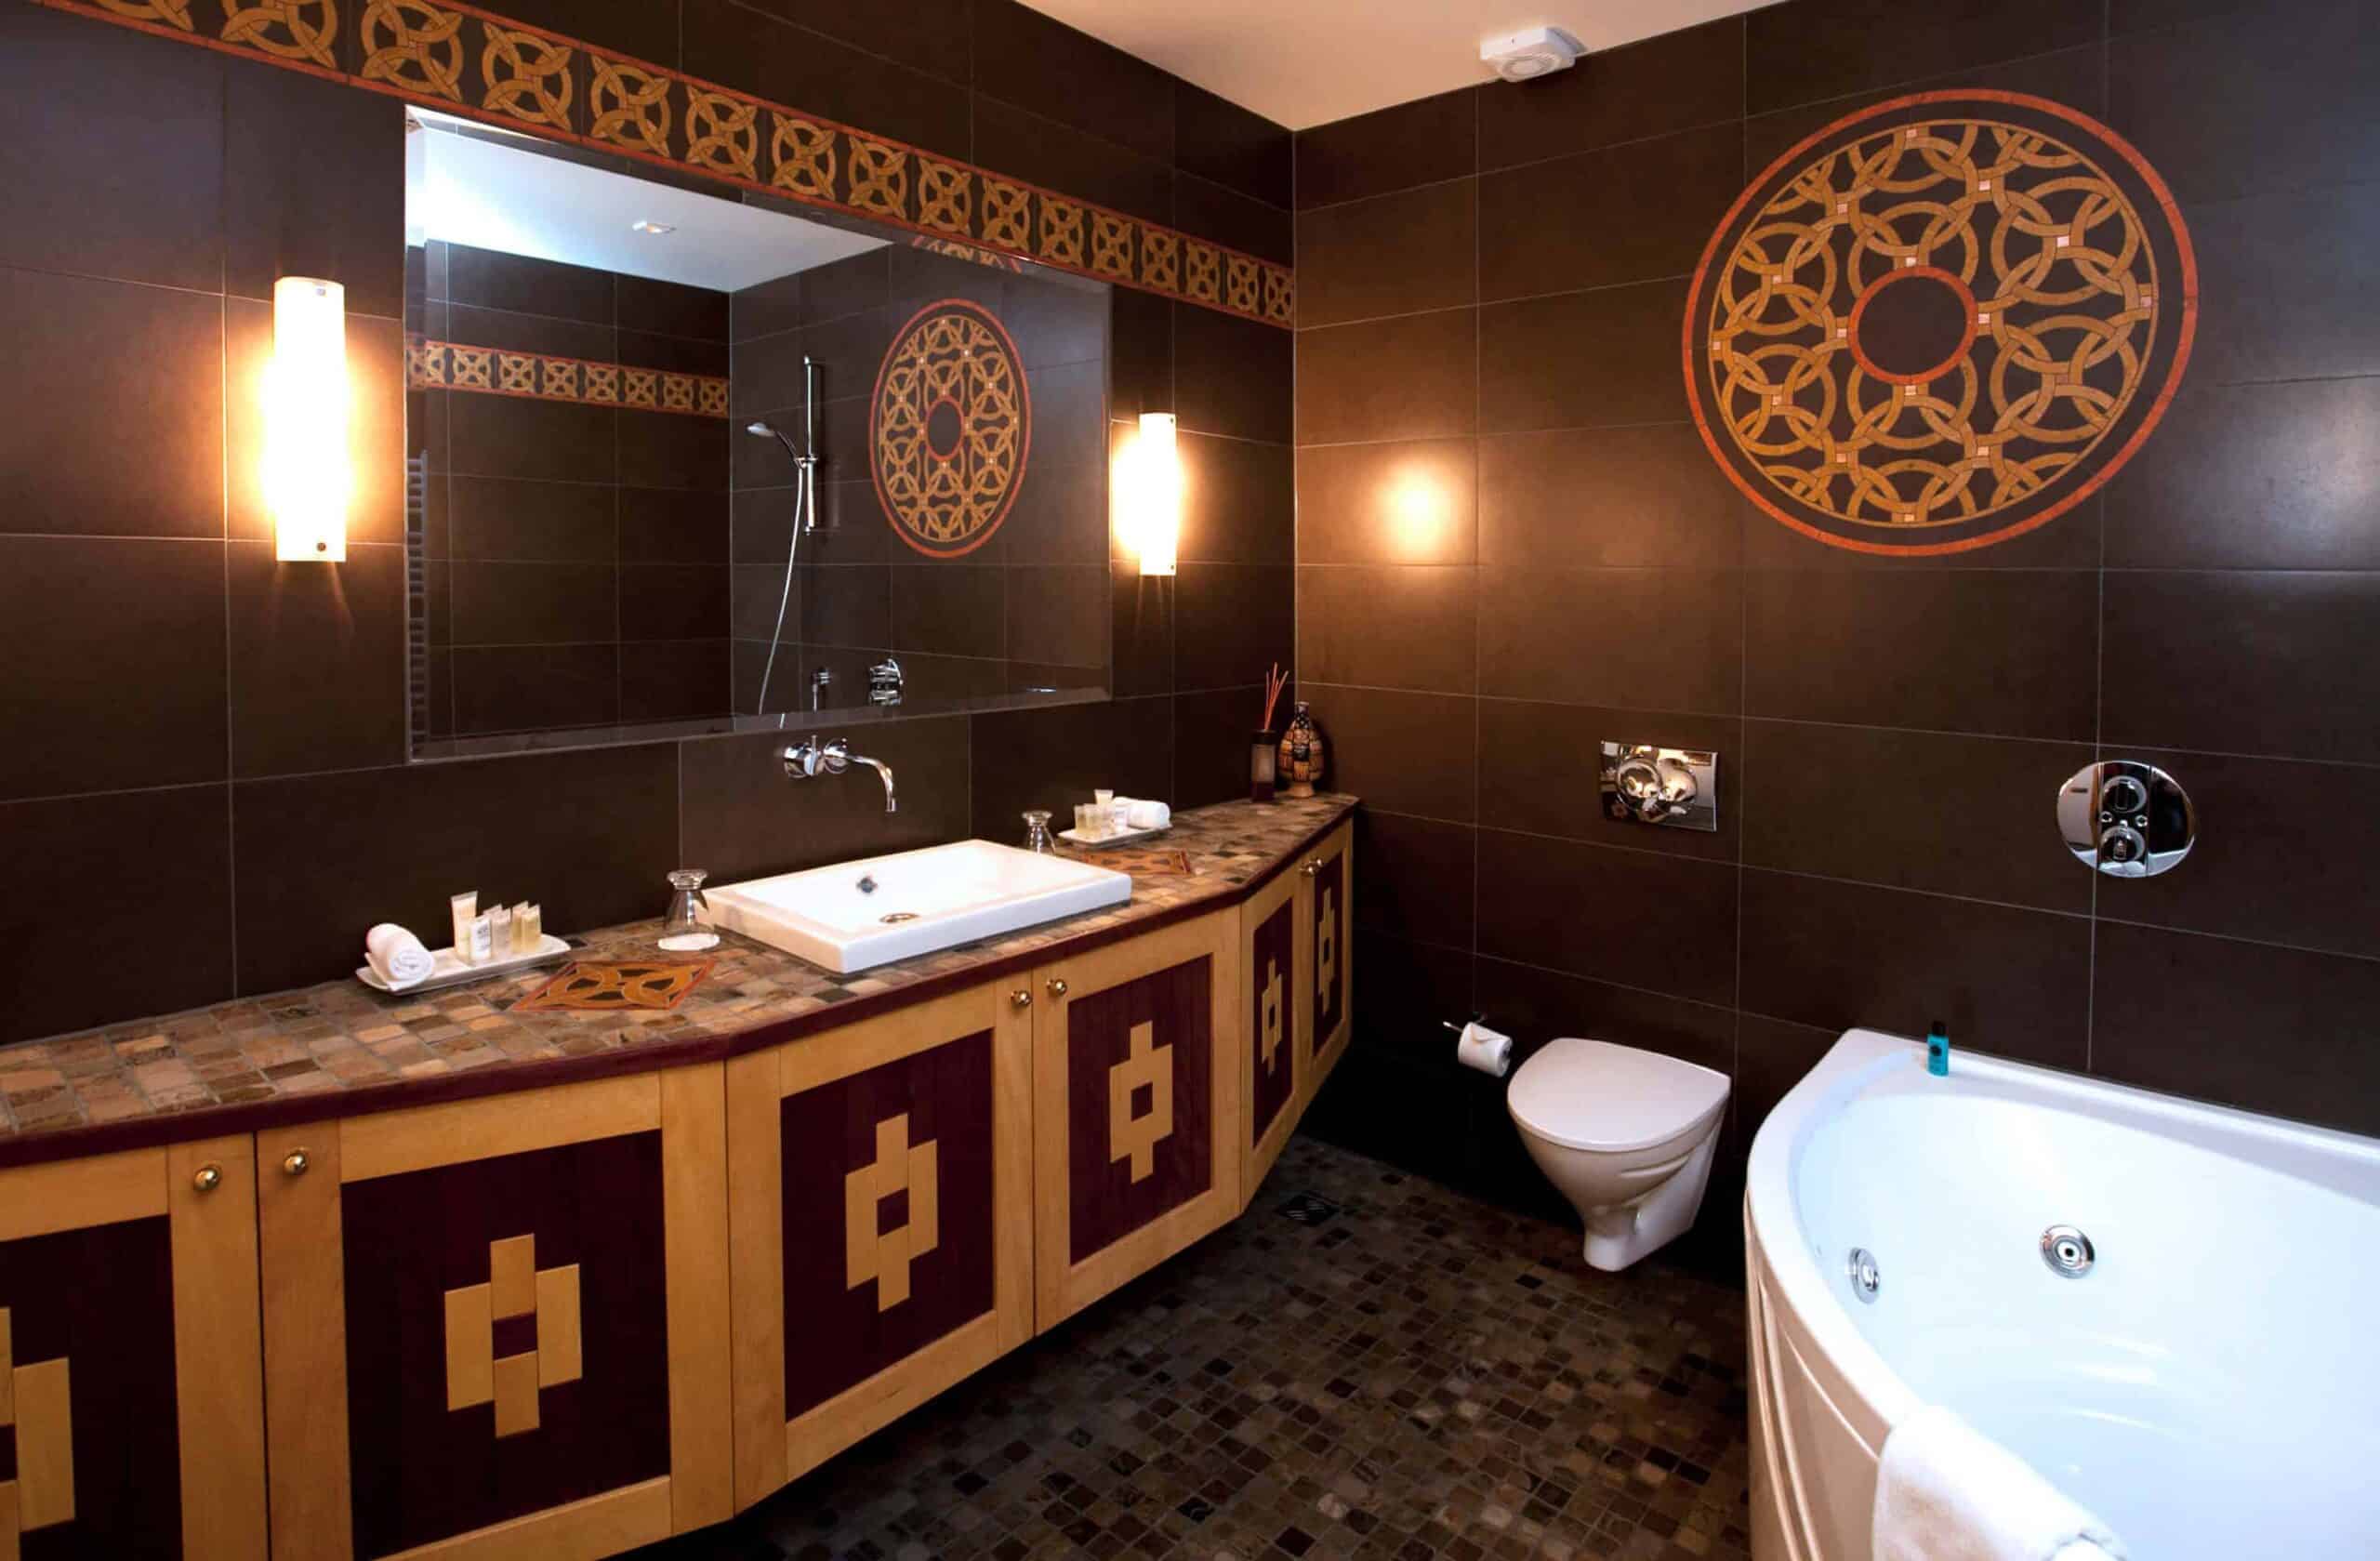 Bathroom in Hotel Rangá's South America suite decorate with dark tiles and wooden accents.